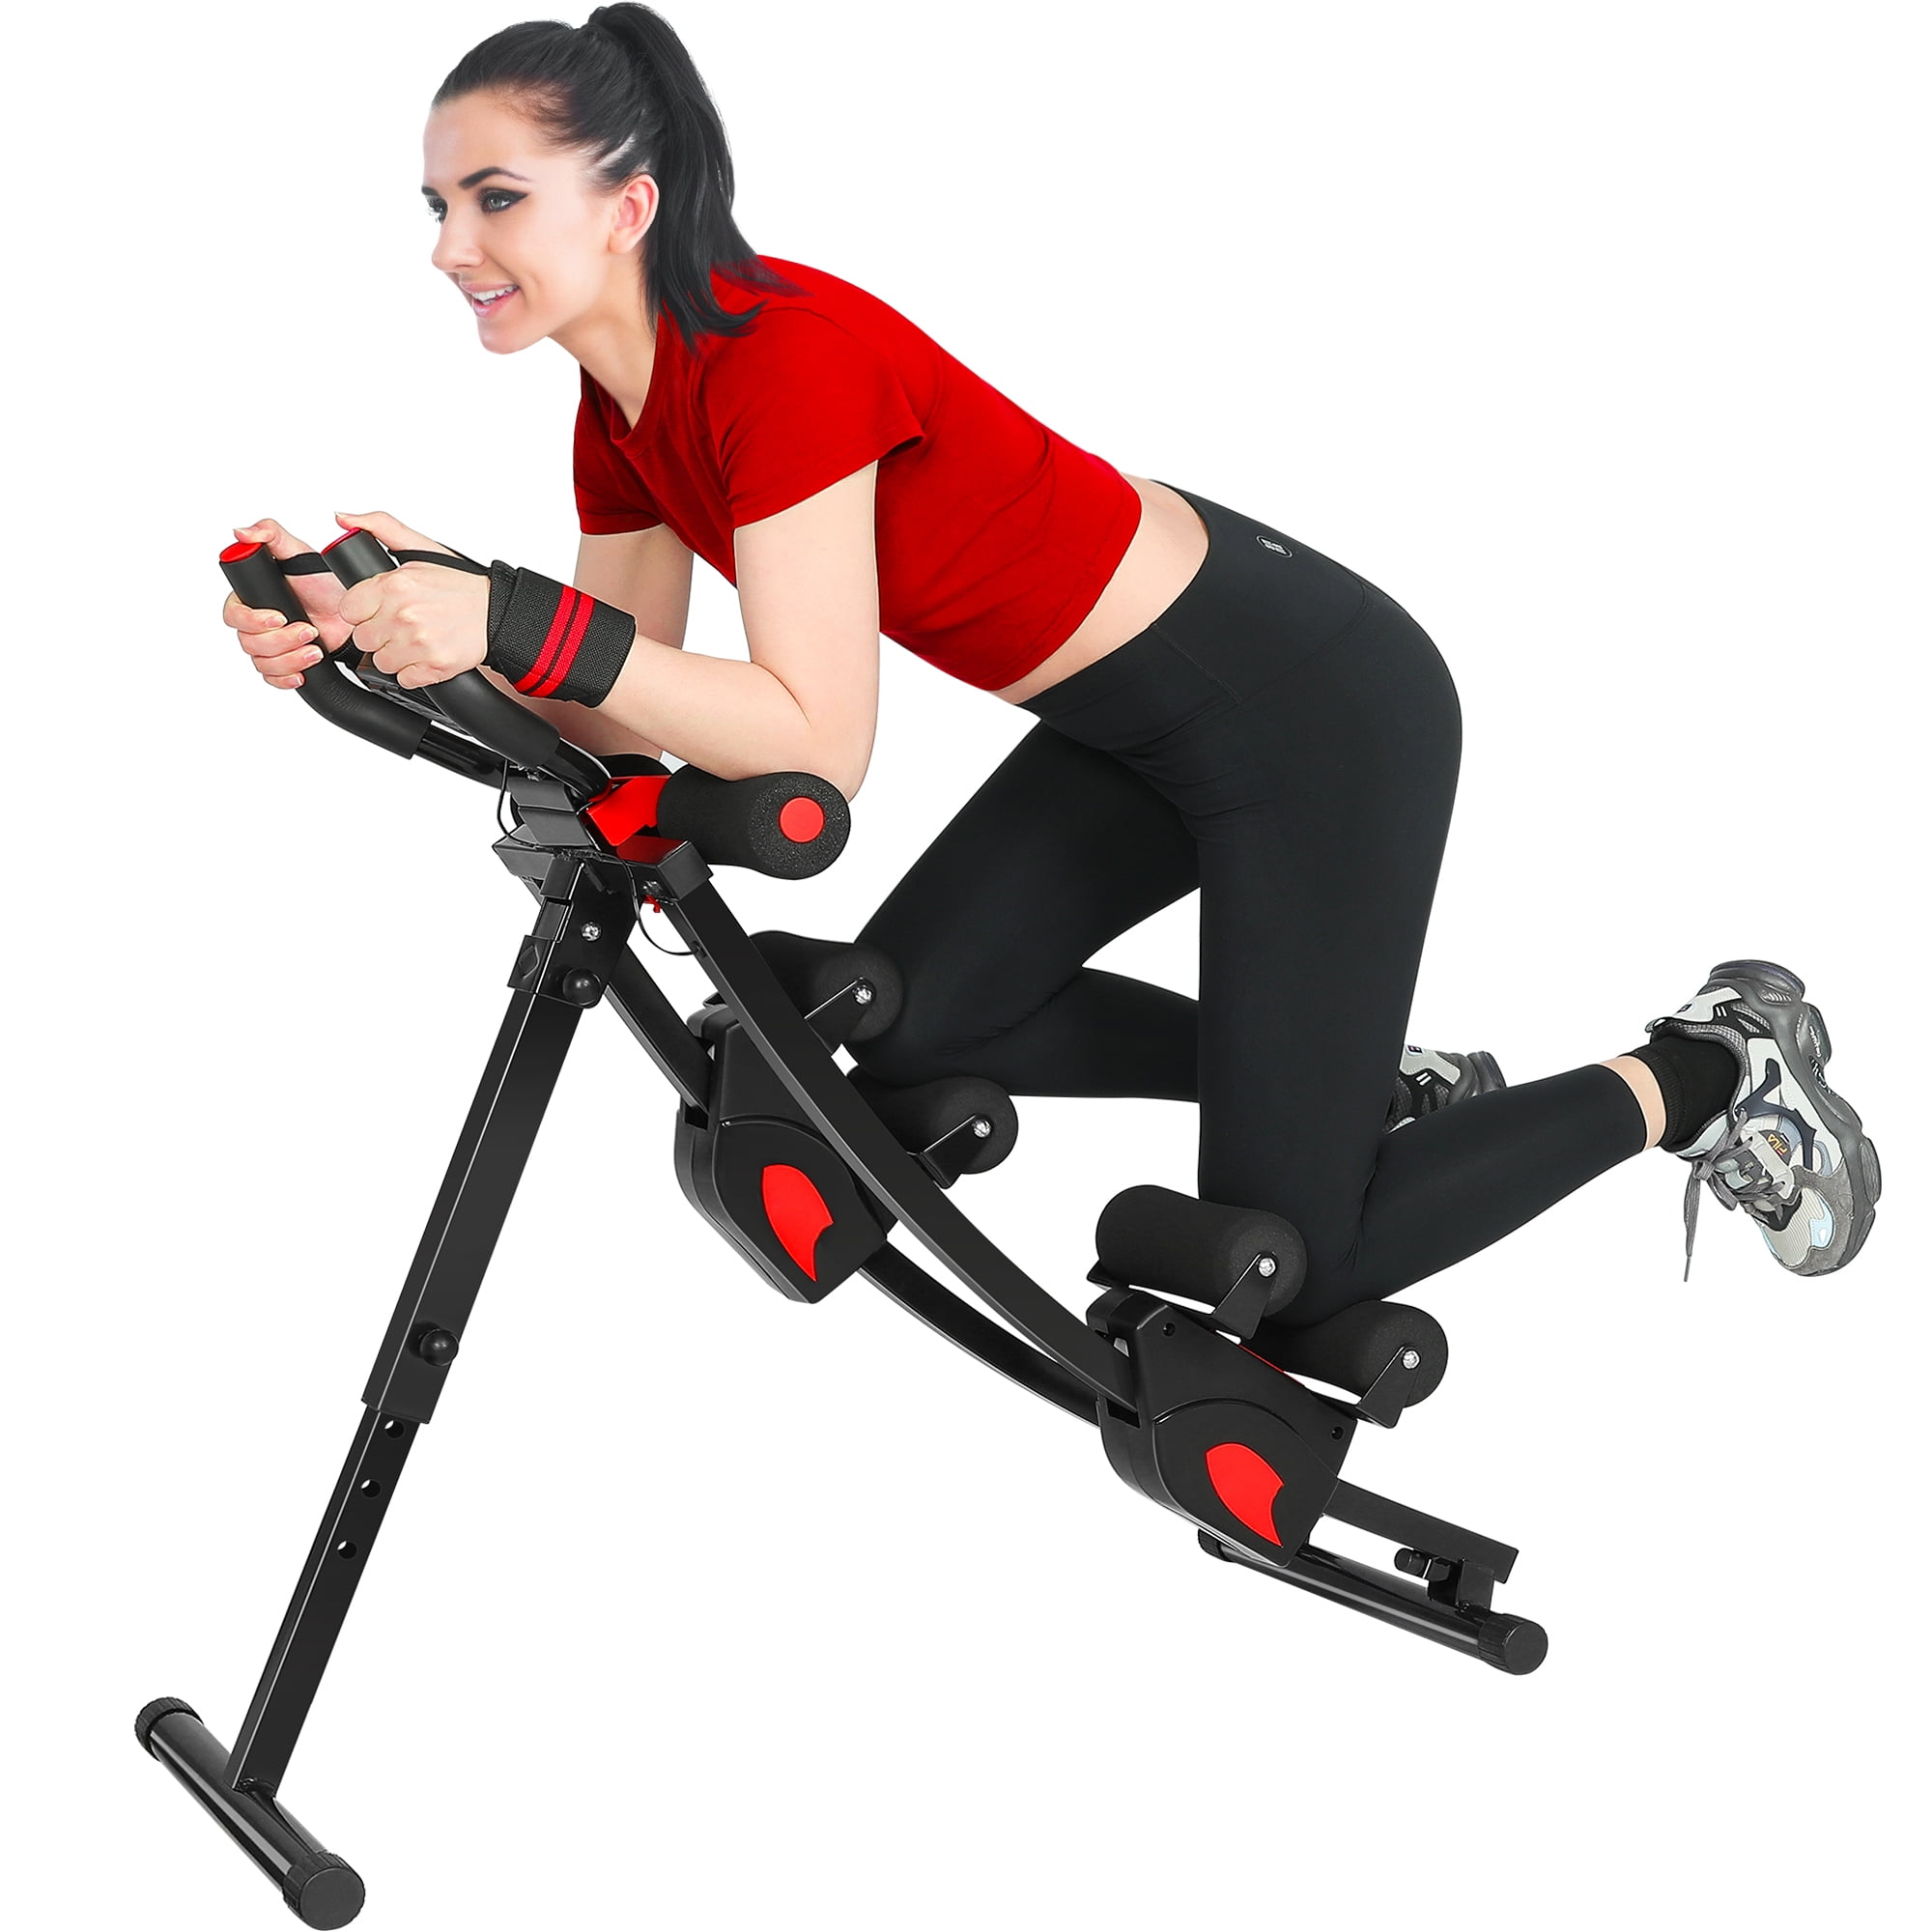 Buy Gdeal Multifunctional AB Flex Abdominal Trainer Fitness Equipment Home  Gym Workout Online